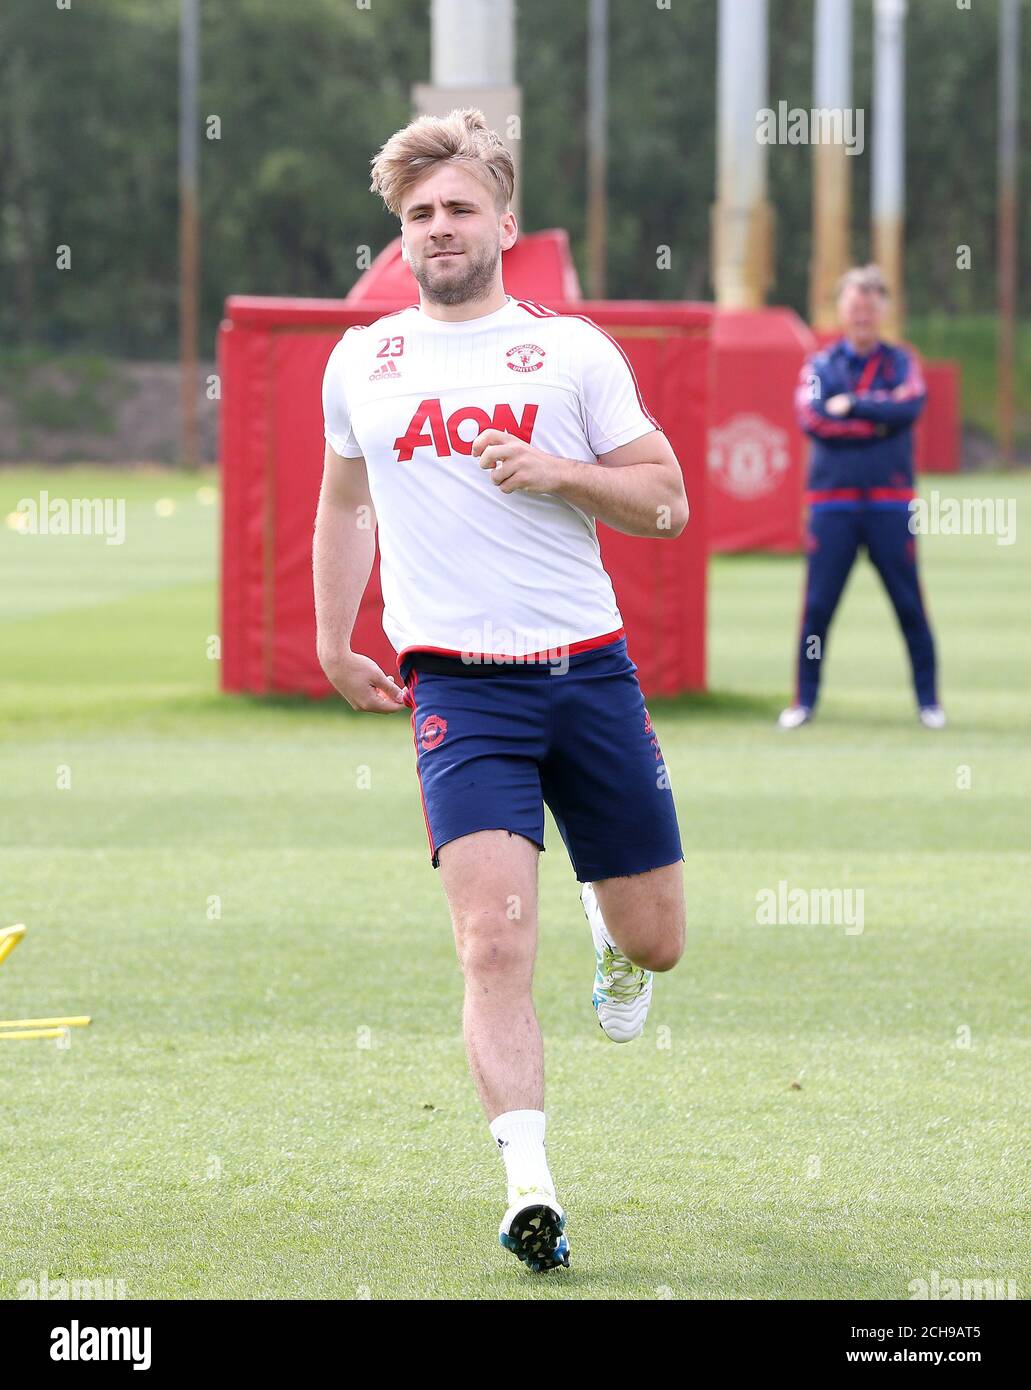 Manchester United's Luke Shaw, during the training session at the Aon Training Complex in Carrington, ahead of their FA Cup Final match with Crystal Palace on Saturday. PRESS ASSOCIATION Photo. Picture date: Thursday May 19, 2016. See PA story SOCCER Man Utd. Photo credit should read: Martin Rickett/PA Wire. RESTRICTIONS: EDITORIAL USE ONLY No use with unauthorised audio, video, data, fixture lists, club/league logos or 'live' services. Online in-match use limited to 75 images, no video emulation. No use in betting, games or single club/league/player publications. Stock Photo